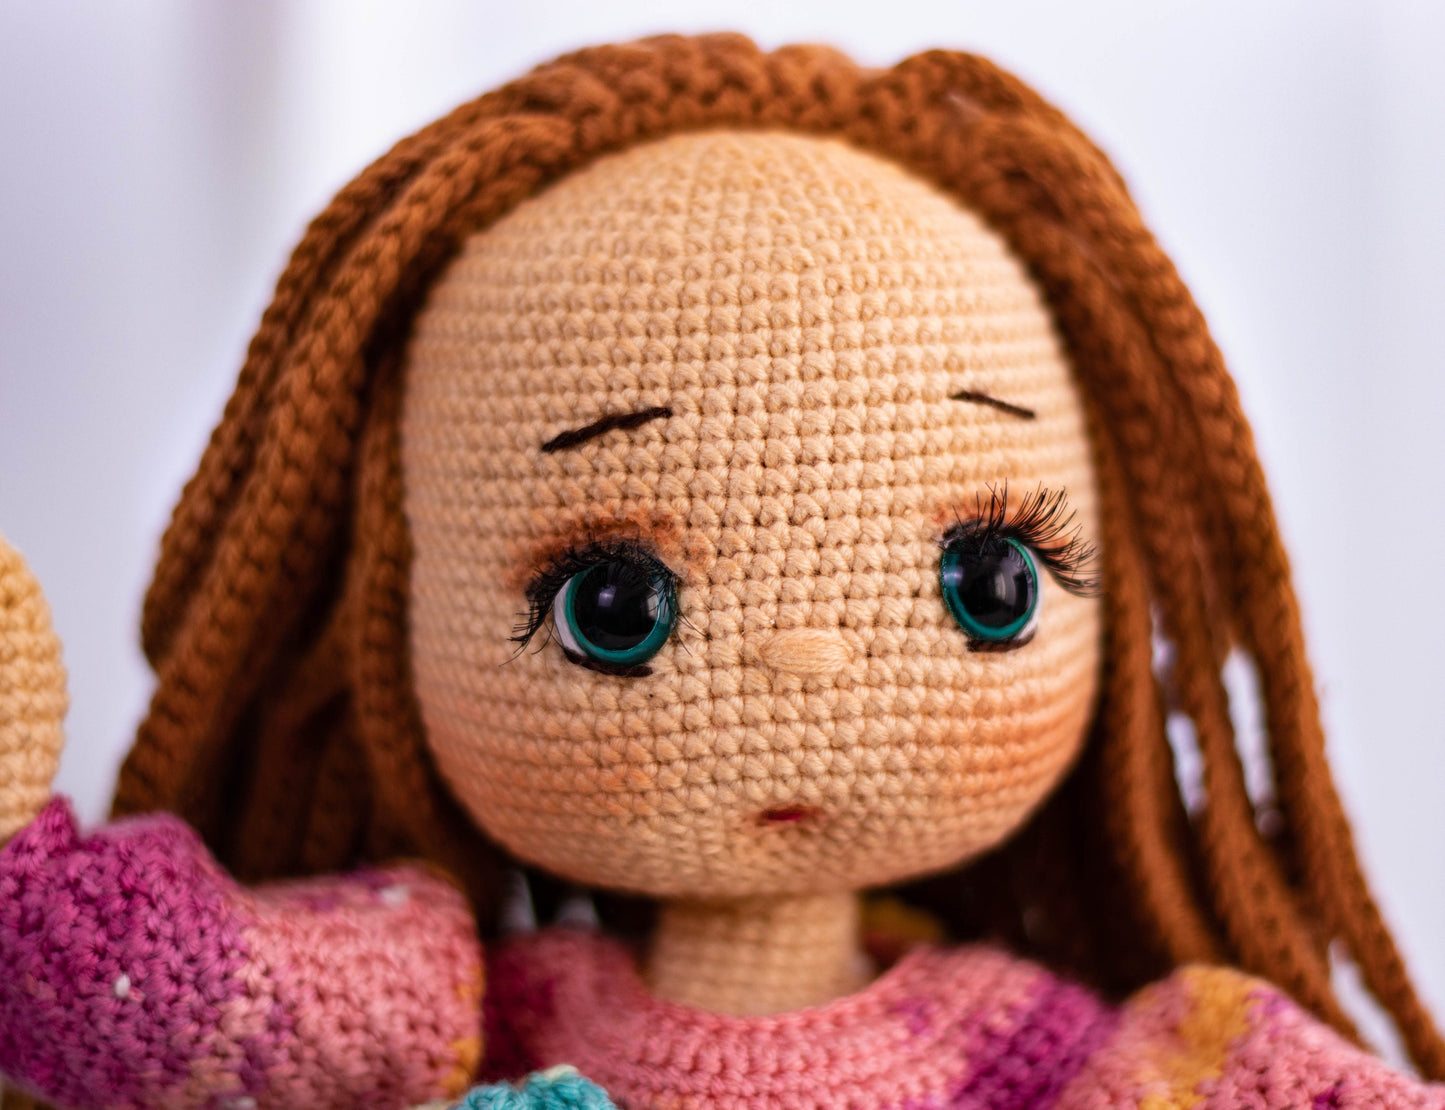 Crochet Doll Princess with Colorful Dress, Doll for Sale